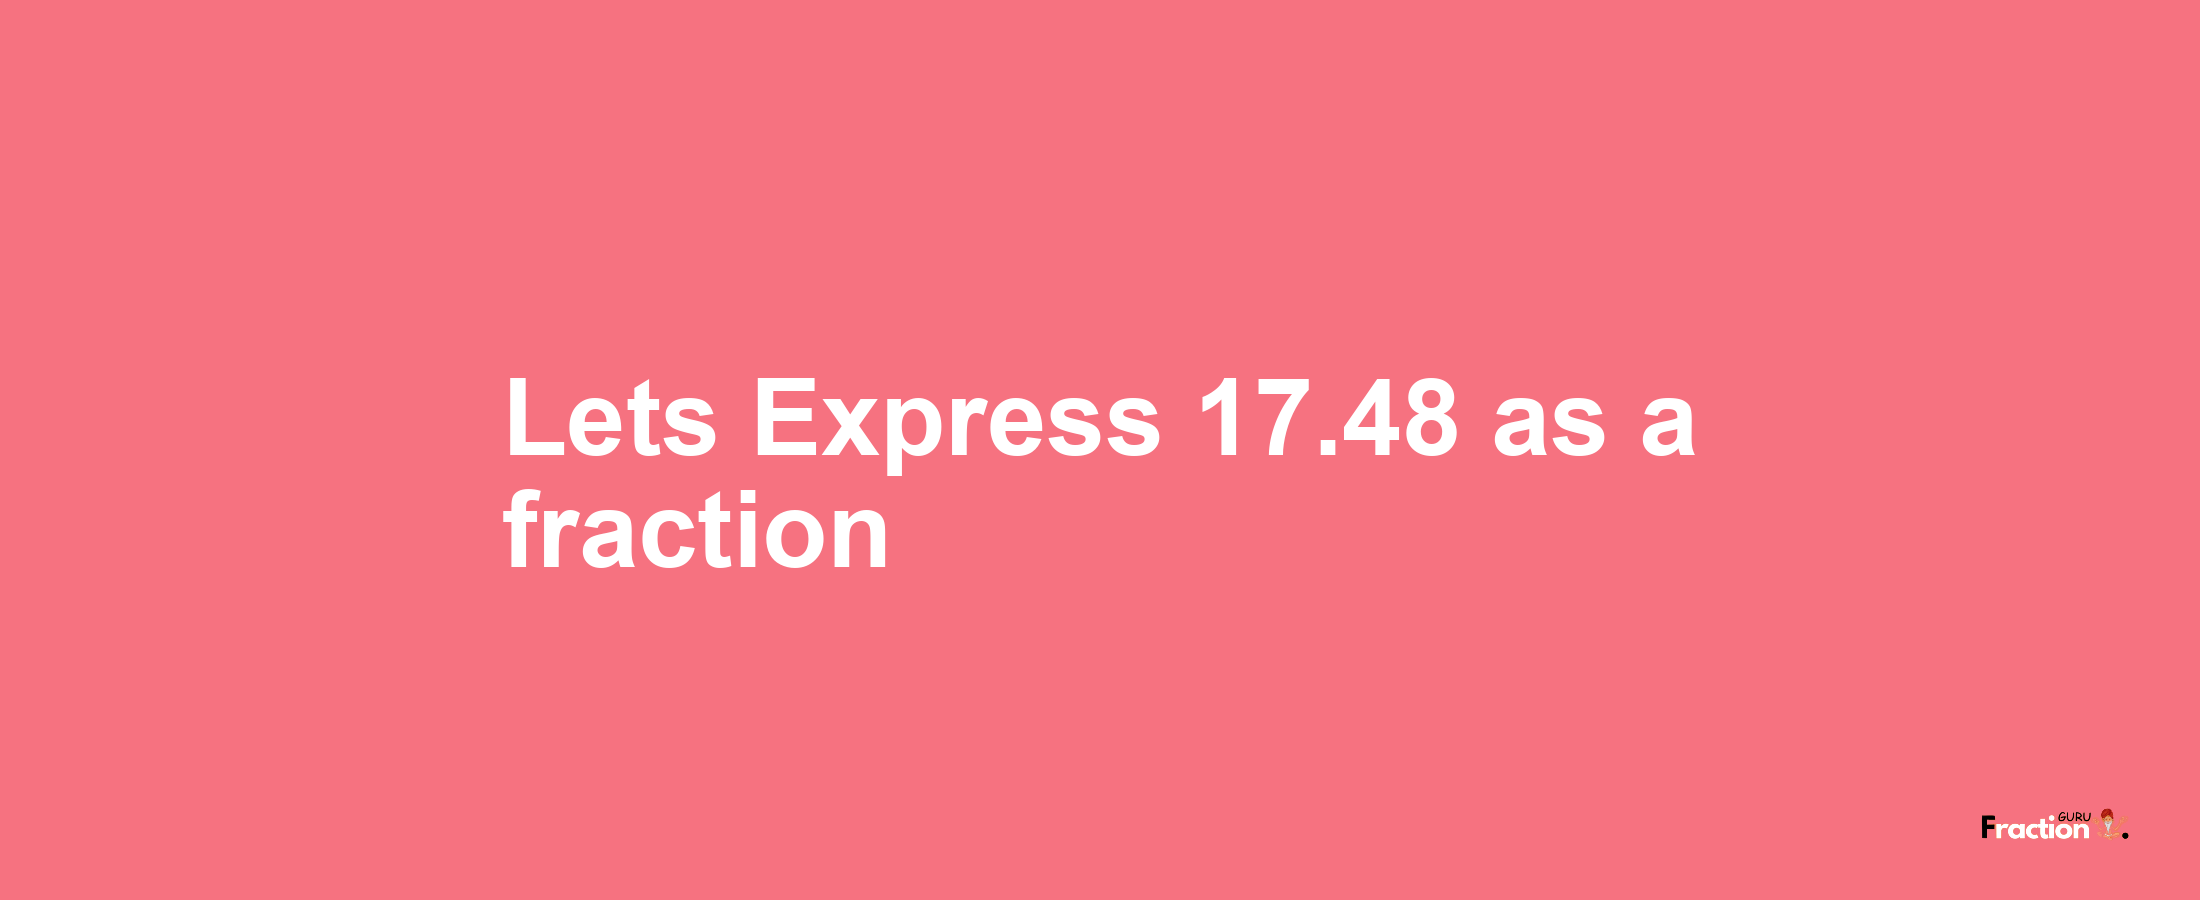 Lets Express 17.48 as afraction